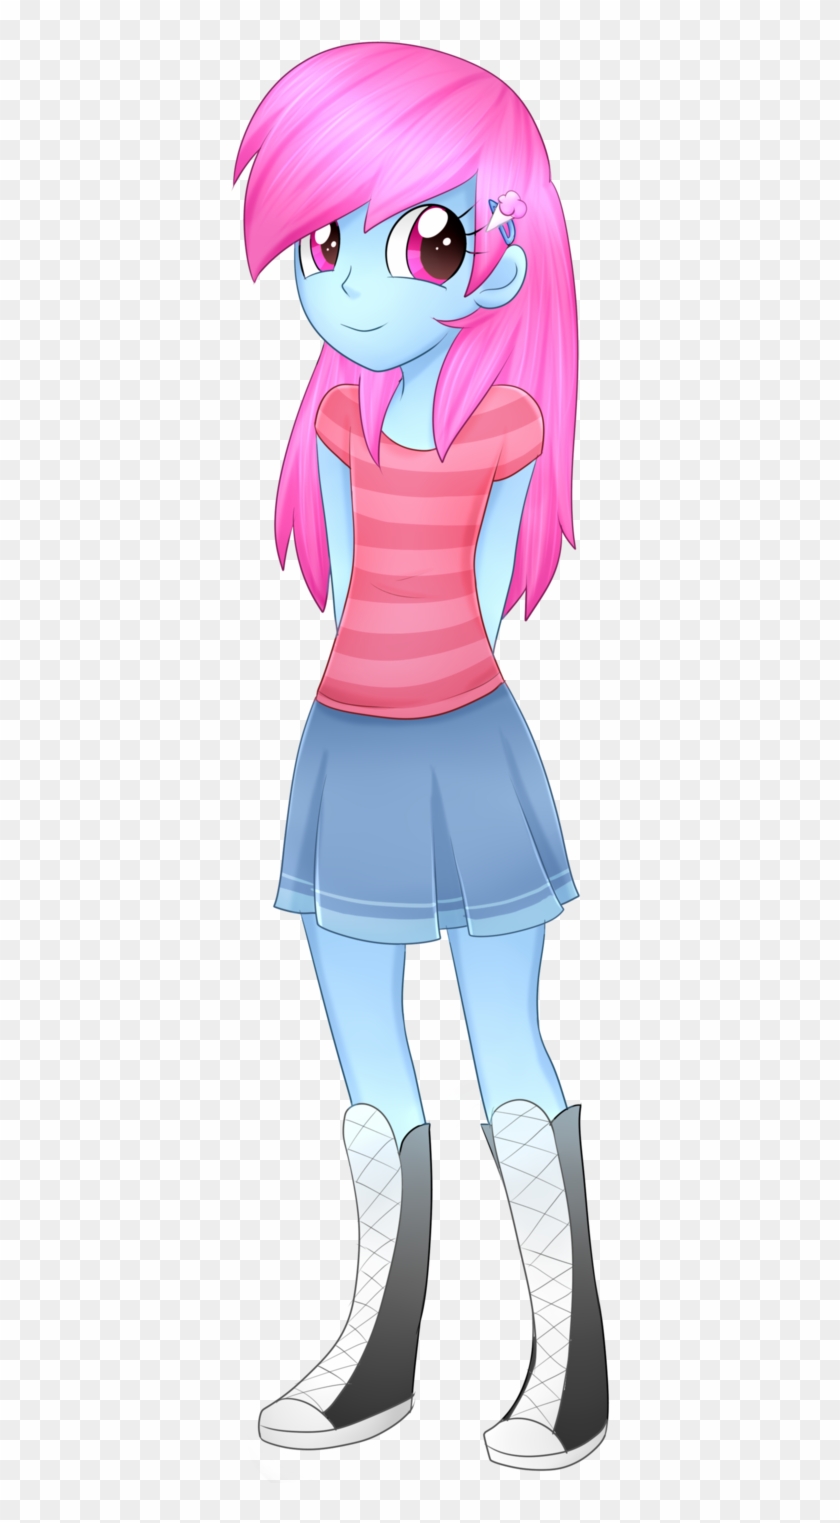 Kaitin Candy Equestria Girl By Scarlet-spectrum - Cosplay #963820